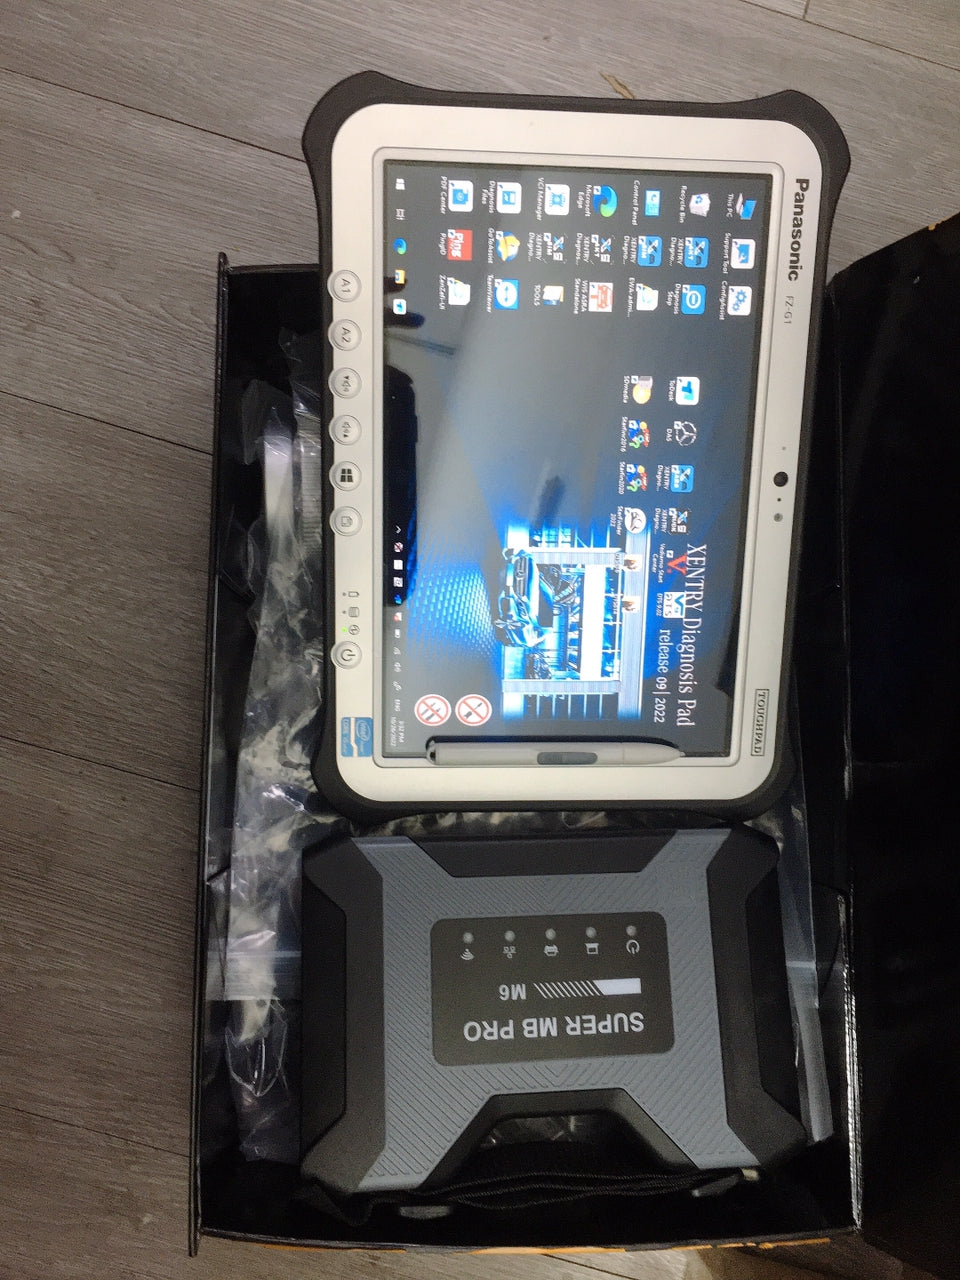 FZ G1 Tablet With Super MB Pro M6 Wireless Star Diagnosis Tool Work on Both Cars and Trucks